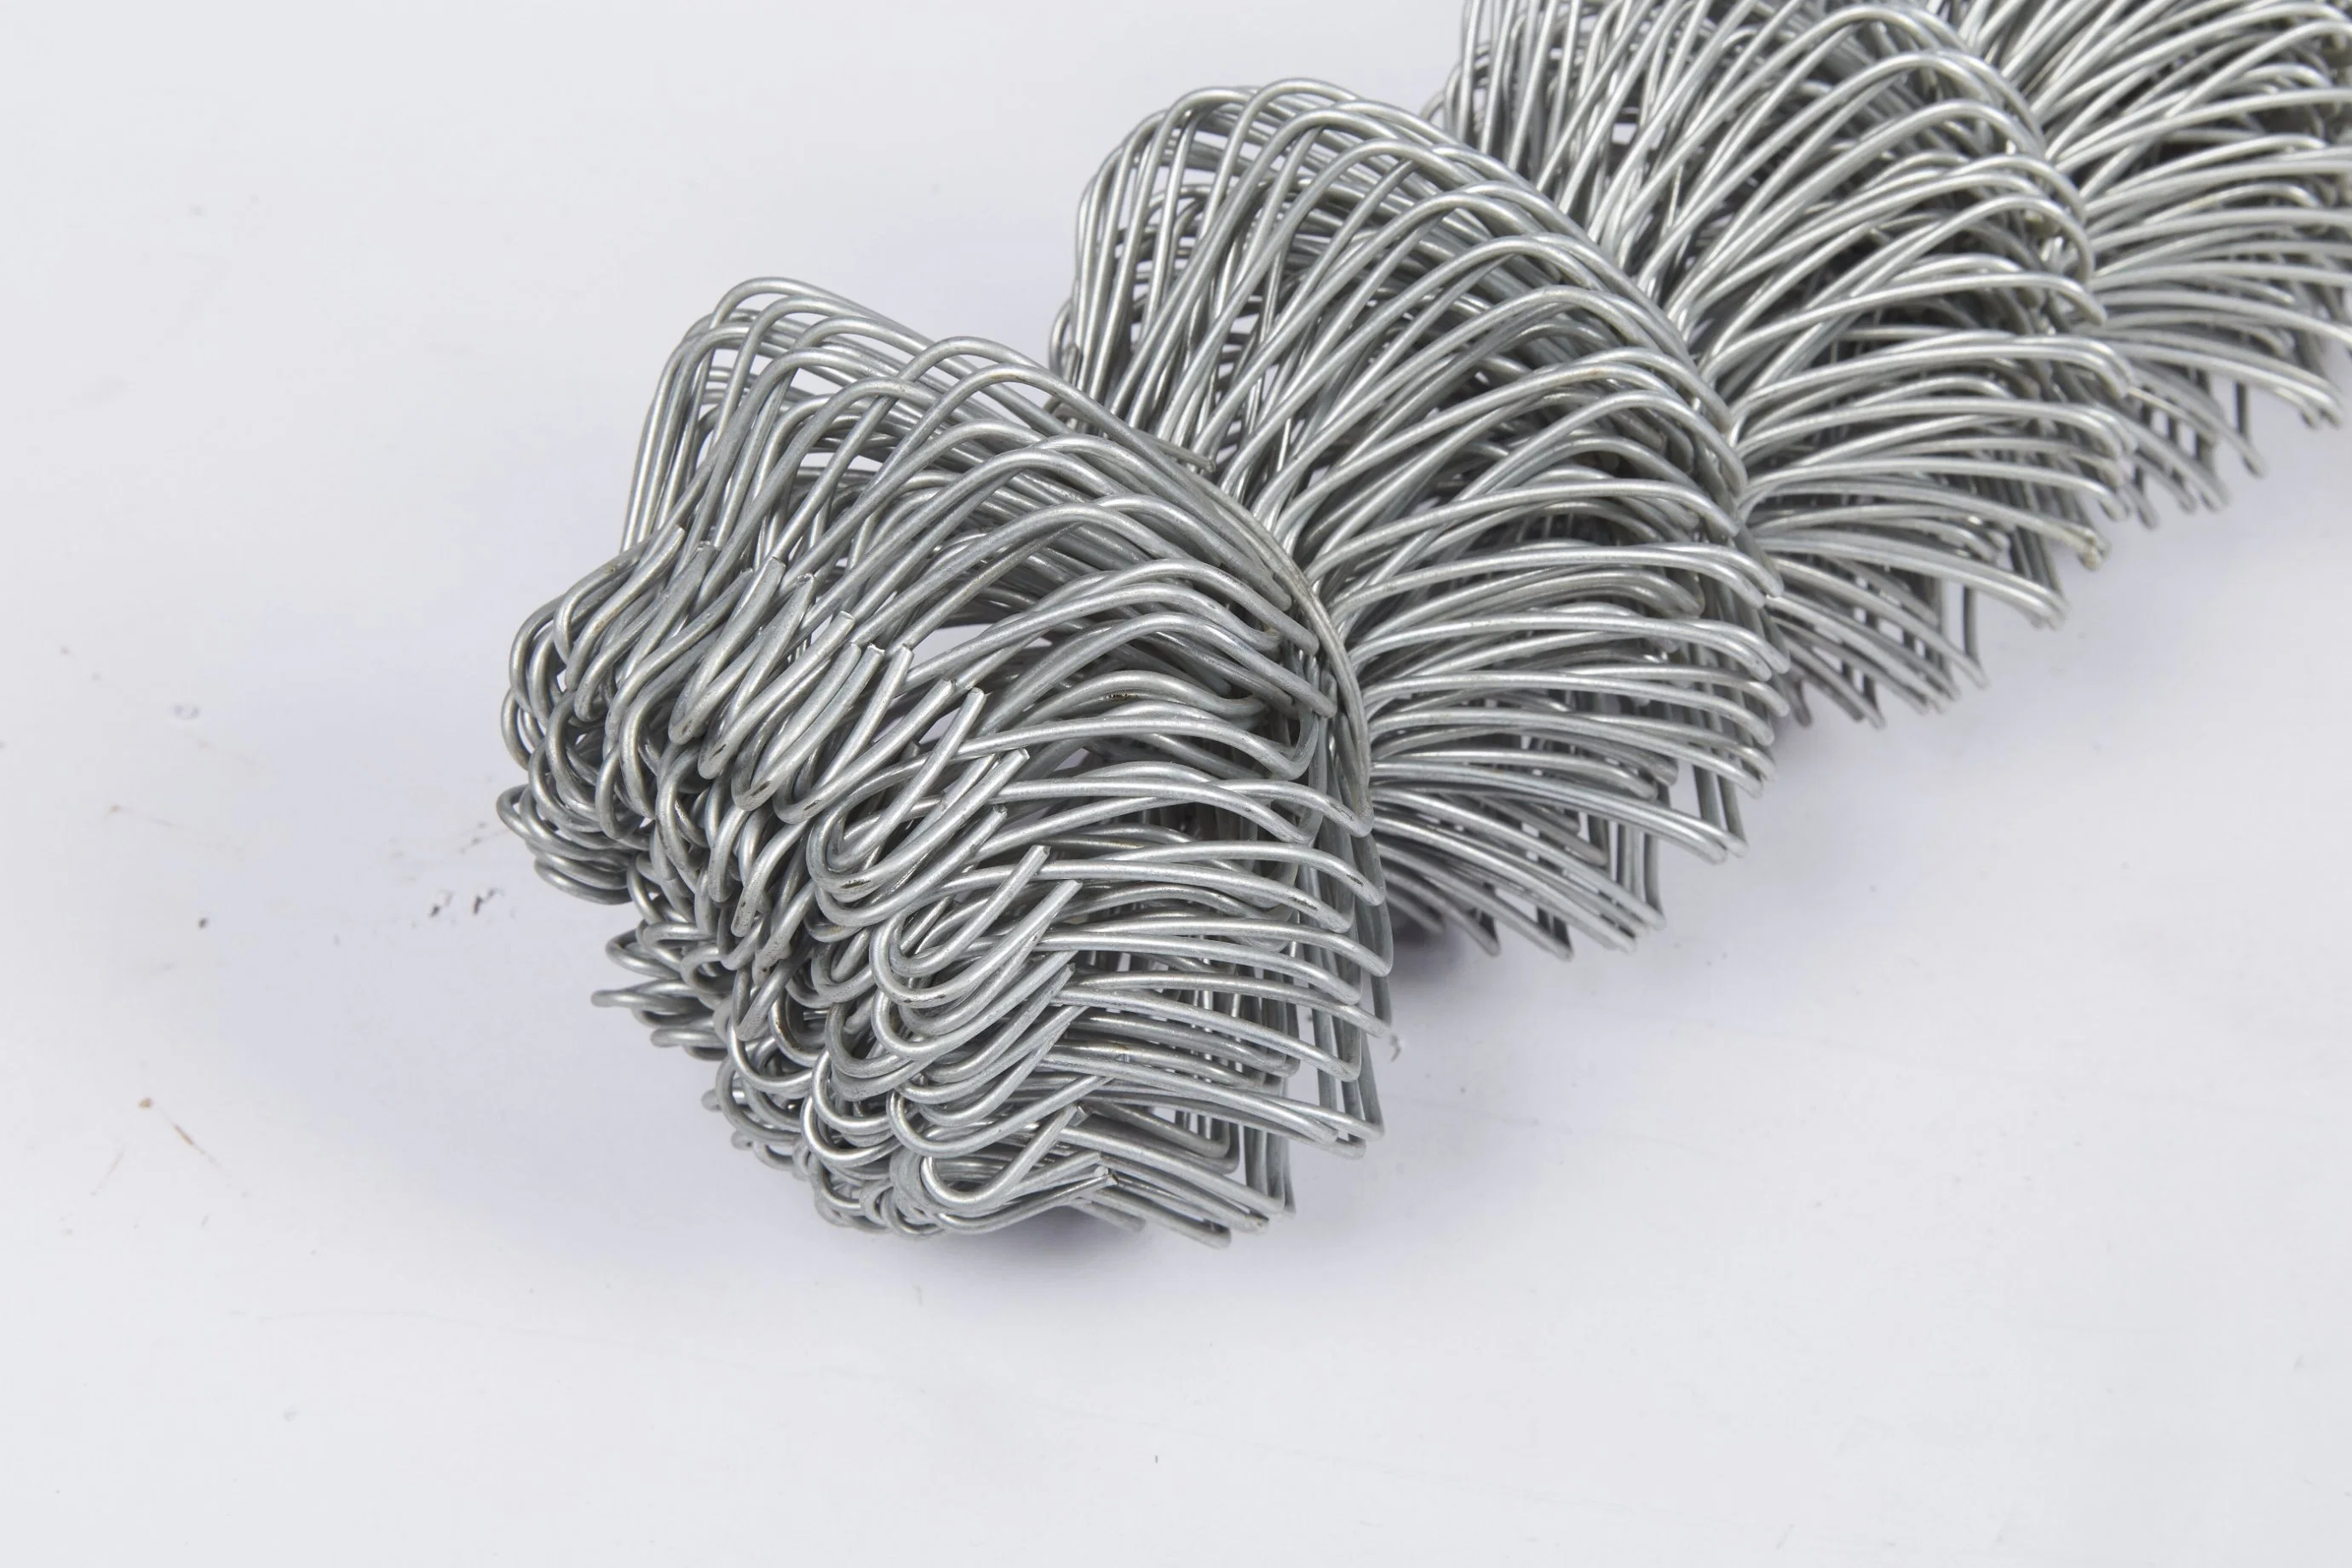 Diamond Wire Mesh Fence / Chain Link Wire